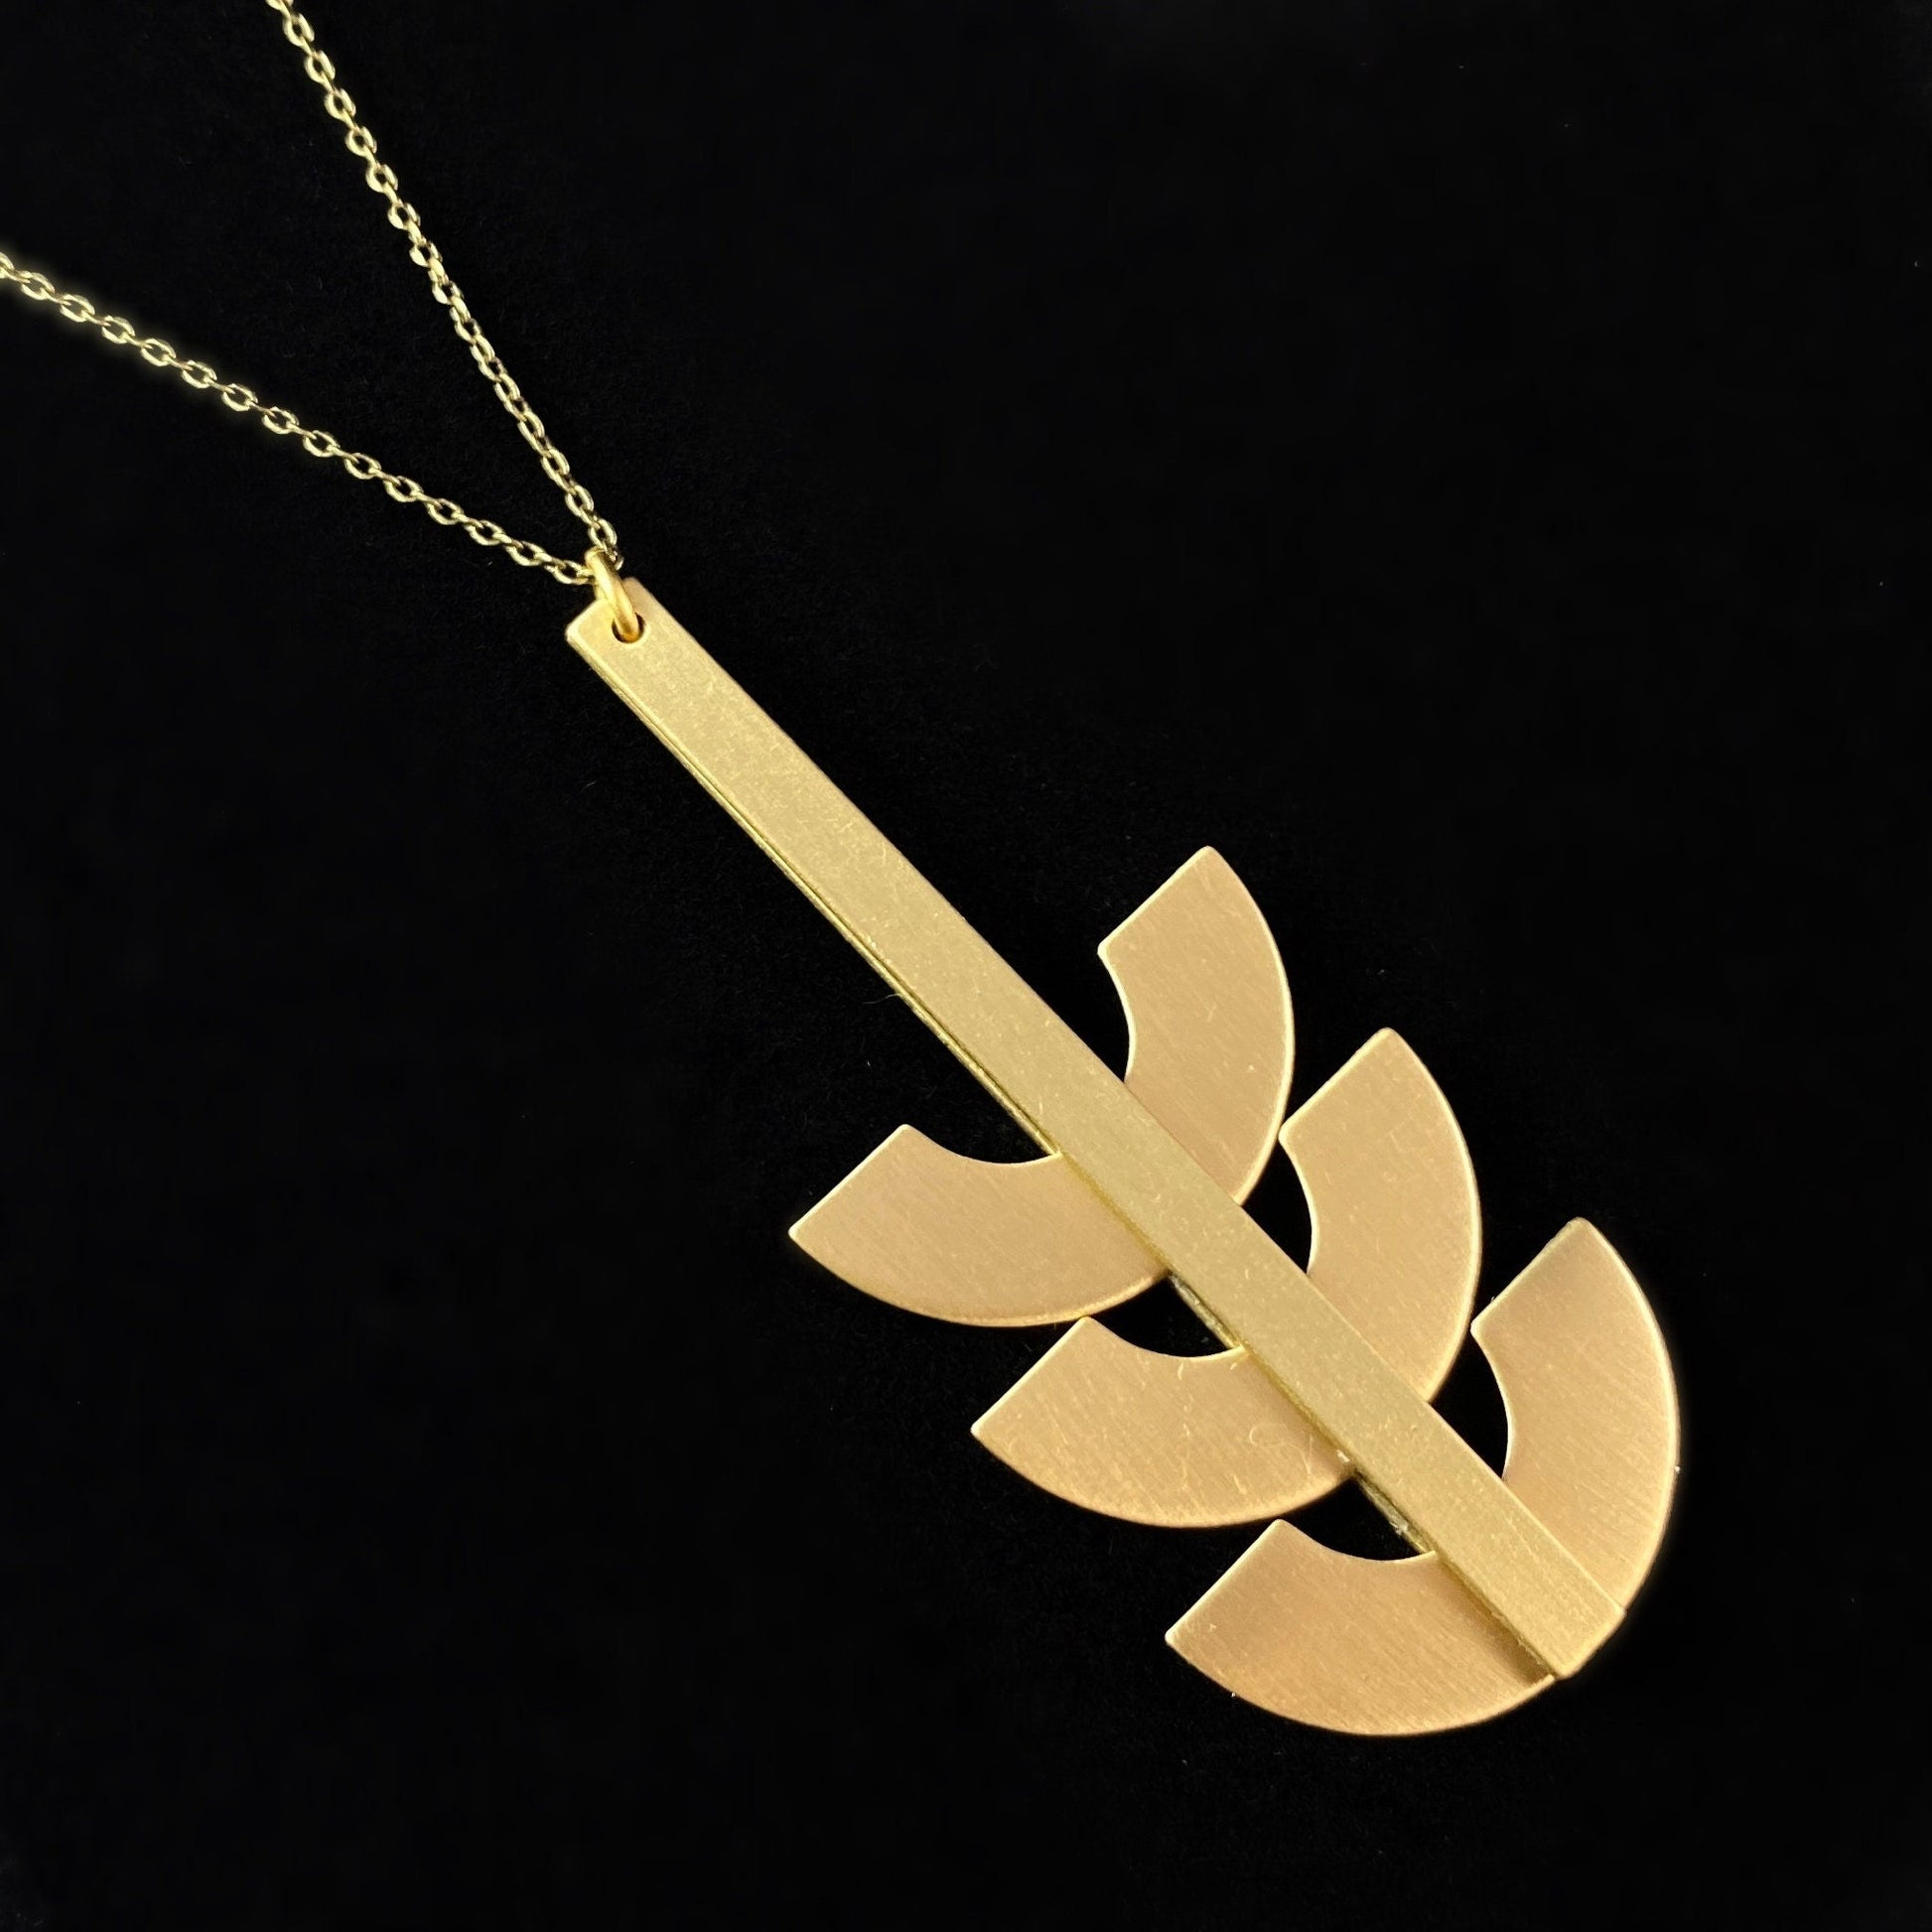 Gold Geometric Art Deco Pendant Necklace - 18kt Gold Abstract Statement Necklace, David Aubrey Jewelry